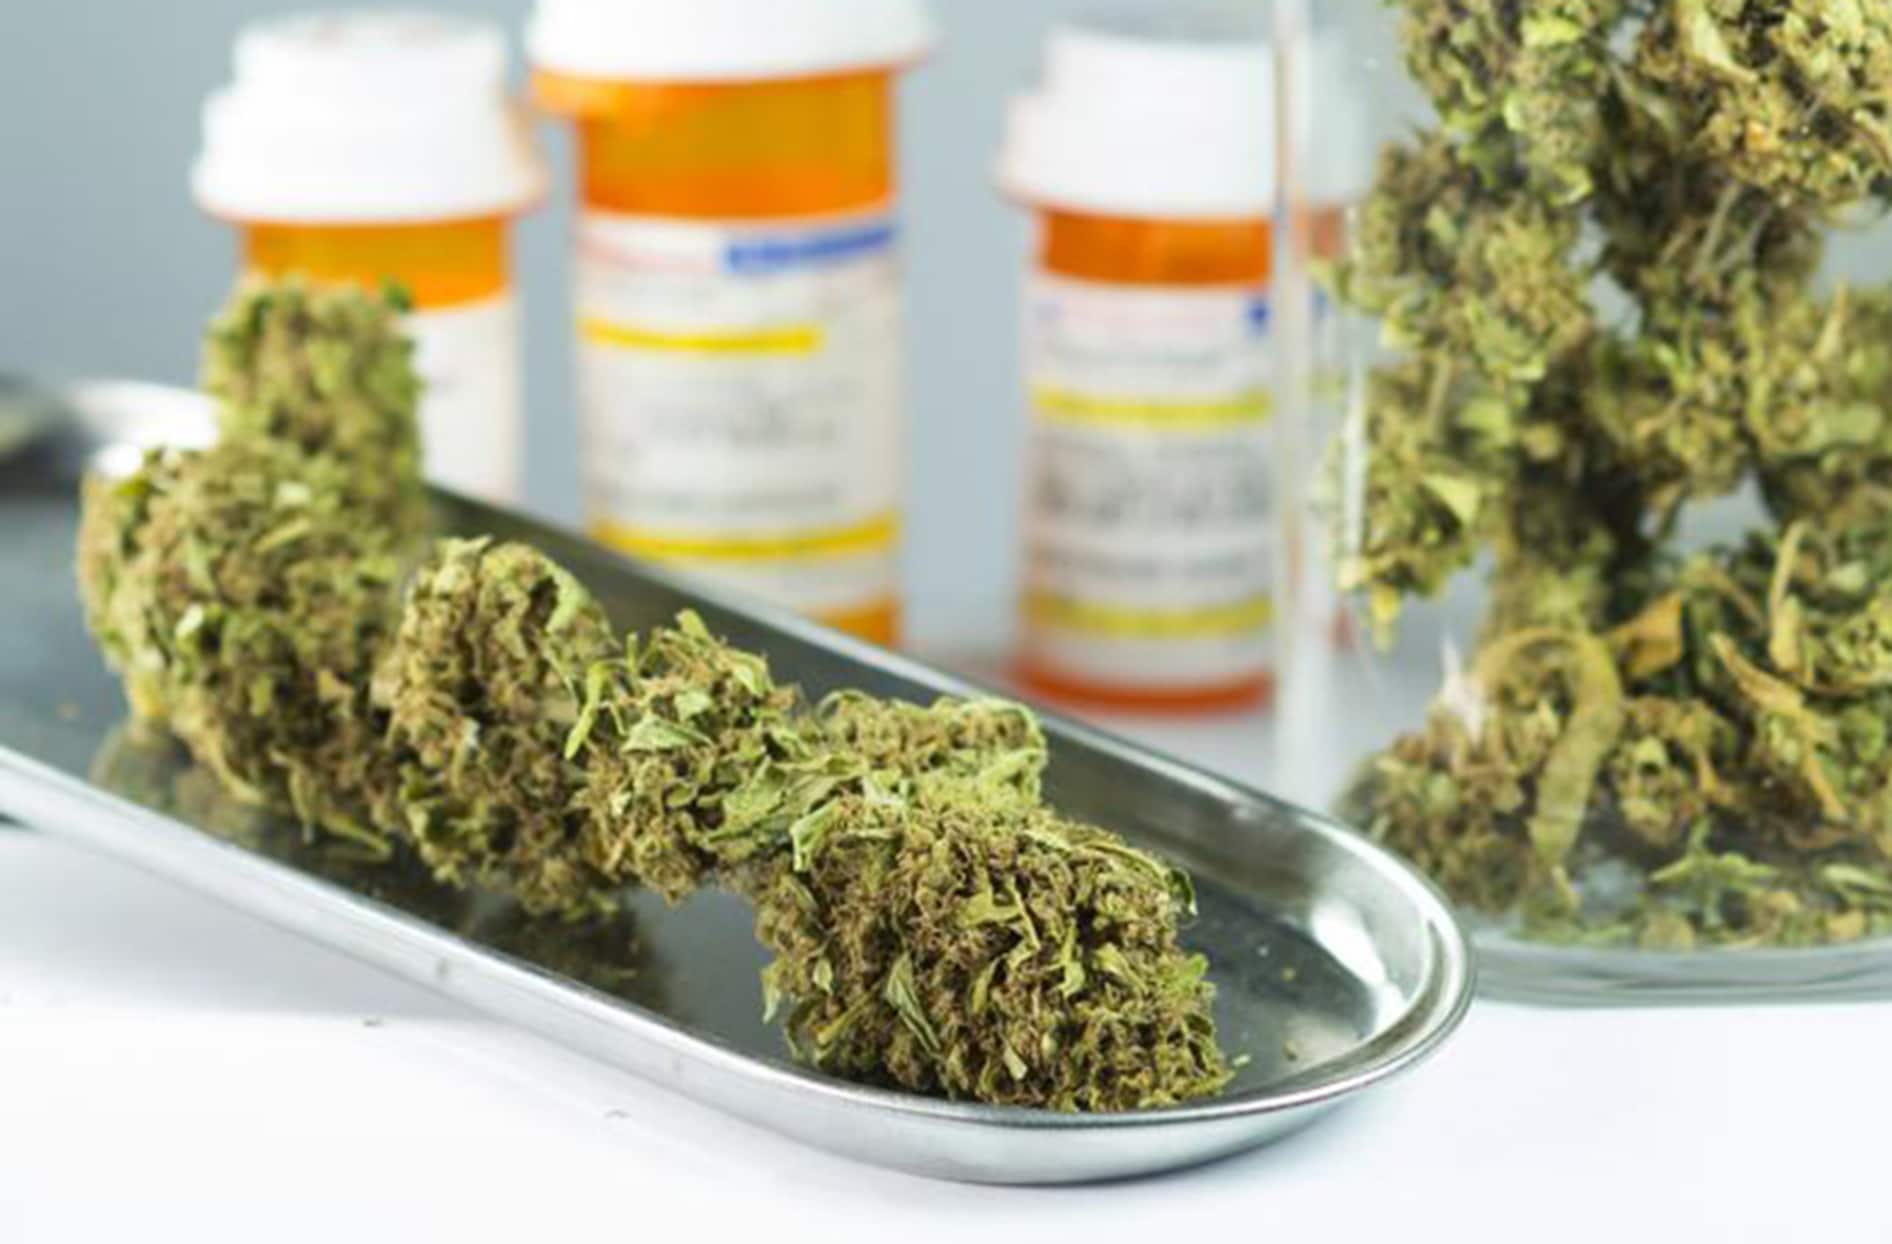 Medical cannabis sits on a metal tray and in a glass jar with prescription bottles in the background